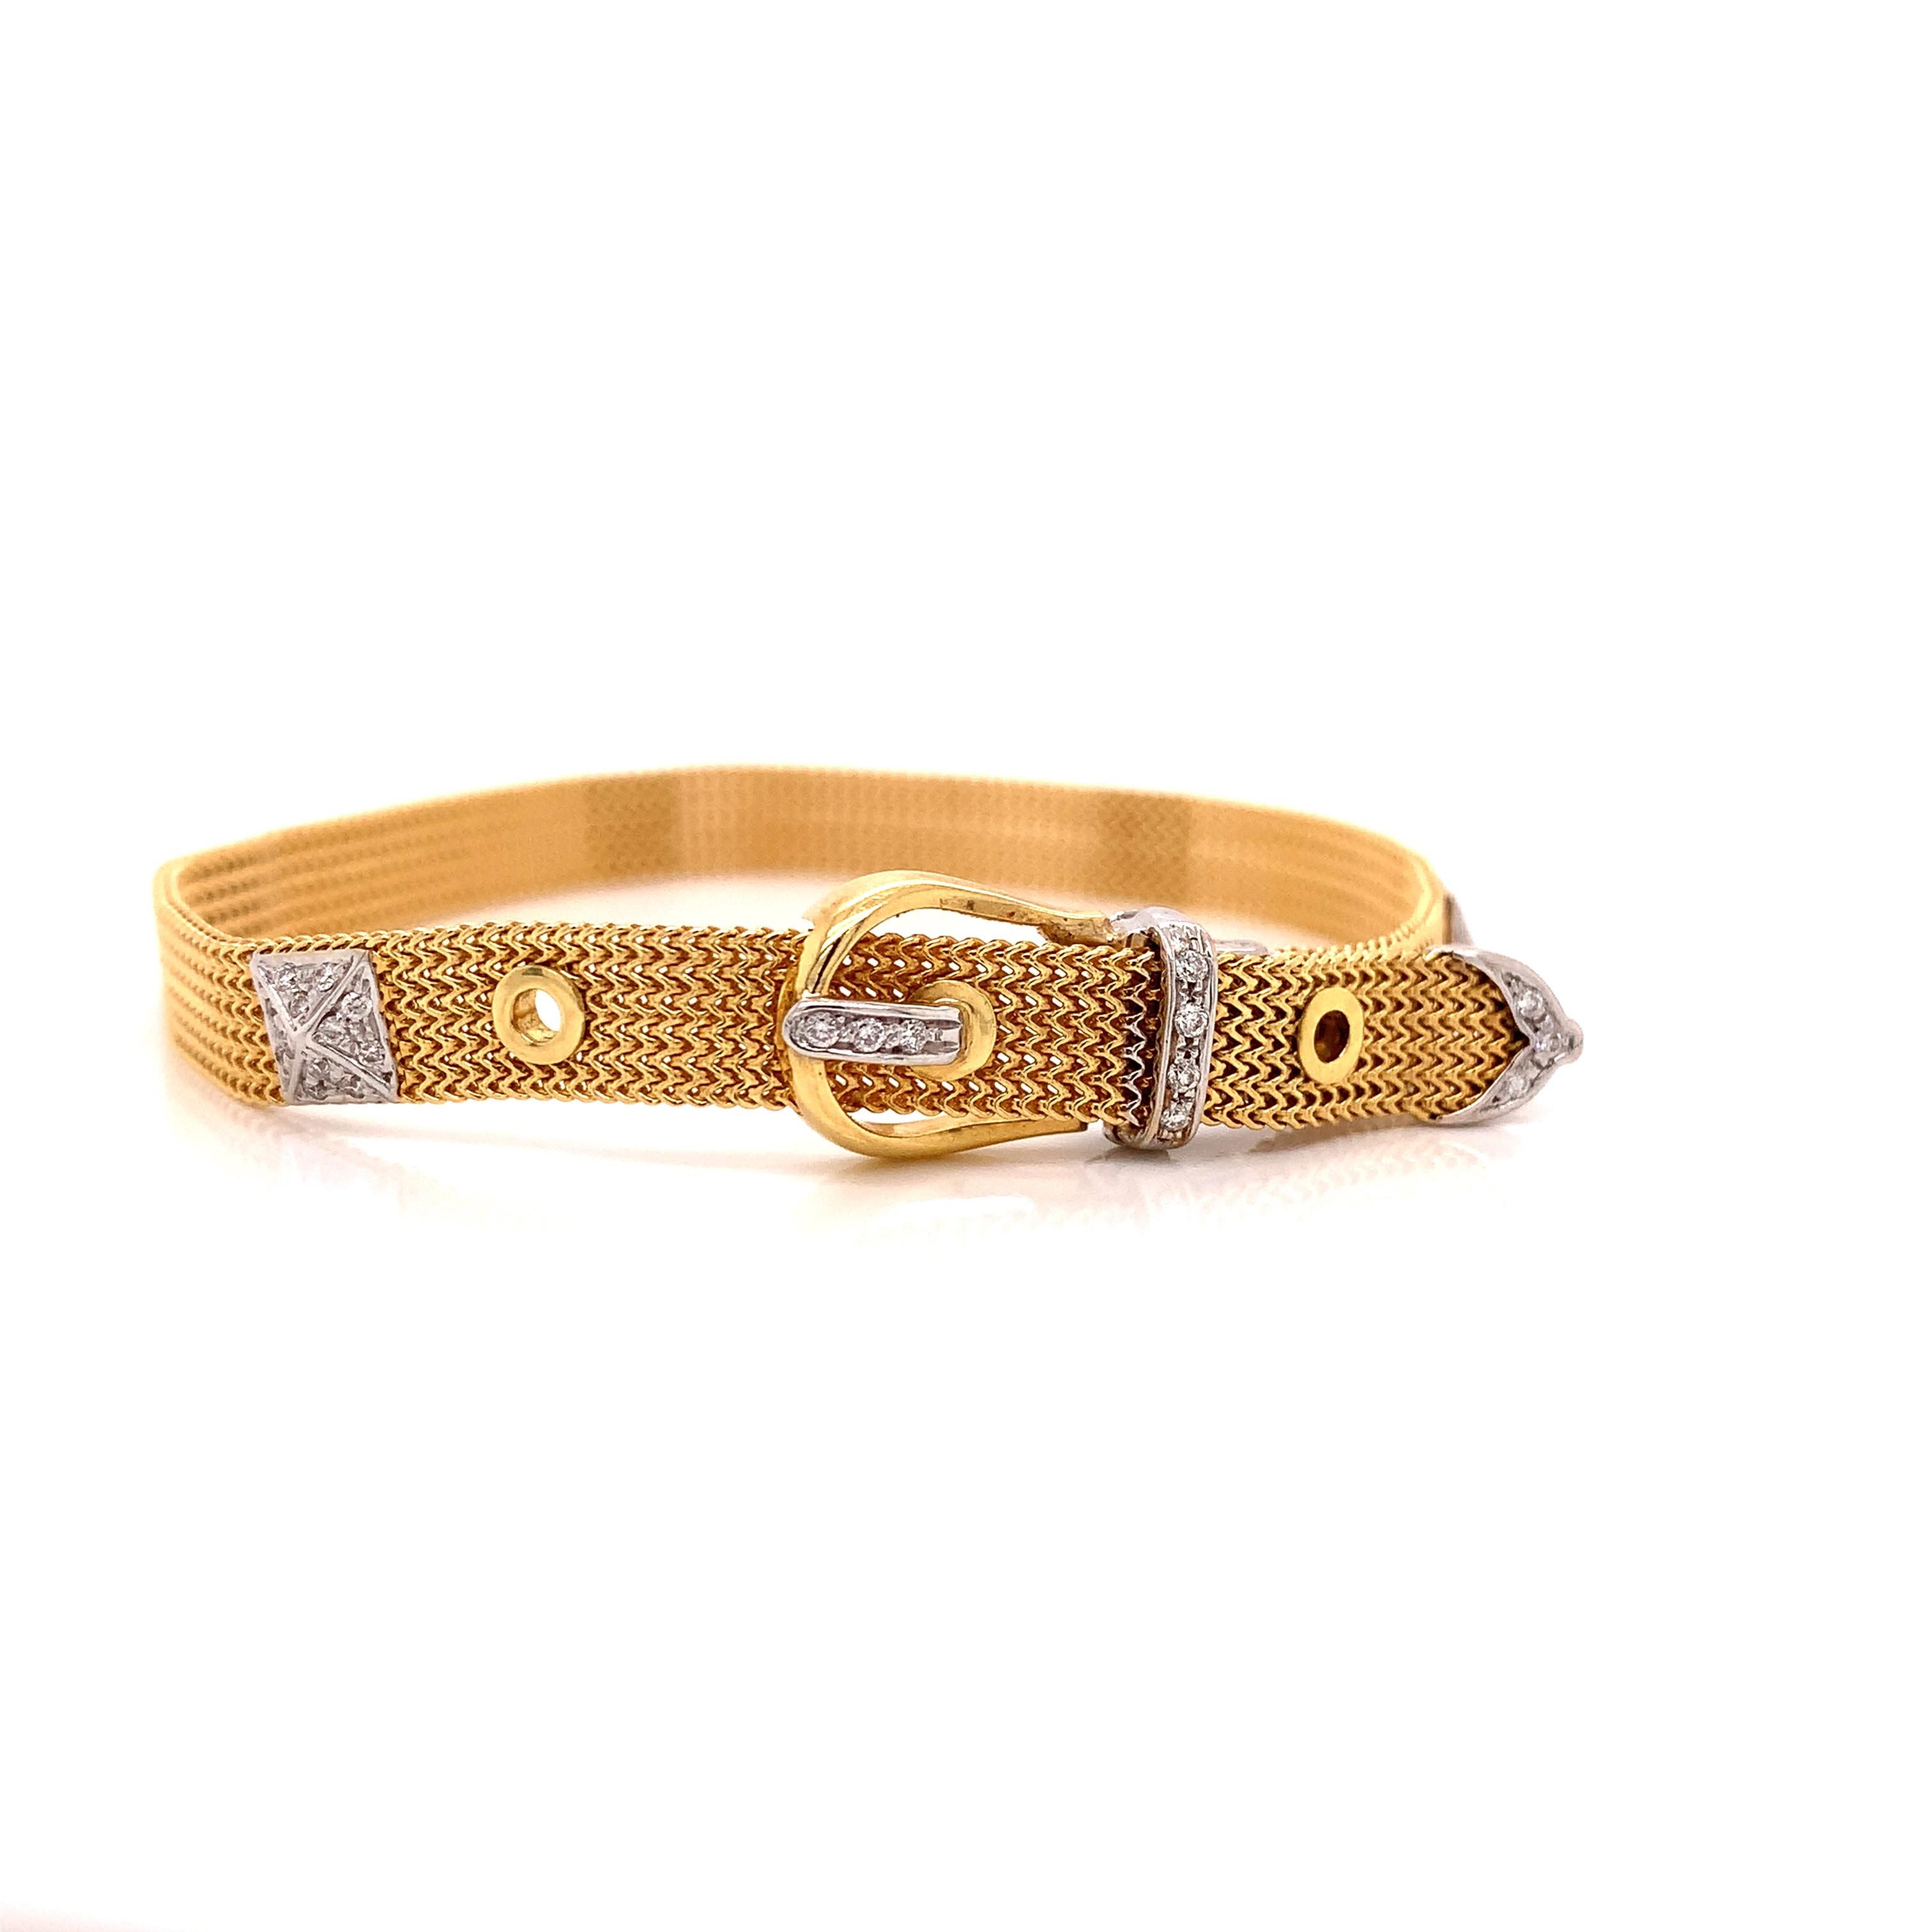 Made by craftsman in Italy, this Brasolin estate diamond buckle bracelet stands alone with its delicate craftsmanship or looks stunning layered.  Also called a Fibbia bracelet, this 18 Kt yellow and white gold bracelet is expertly detailed with .34